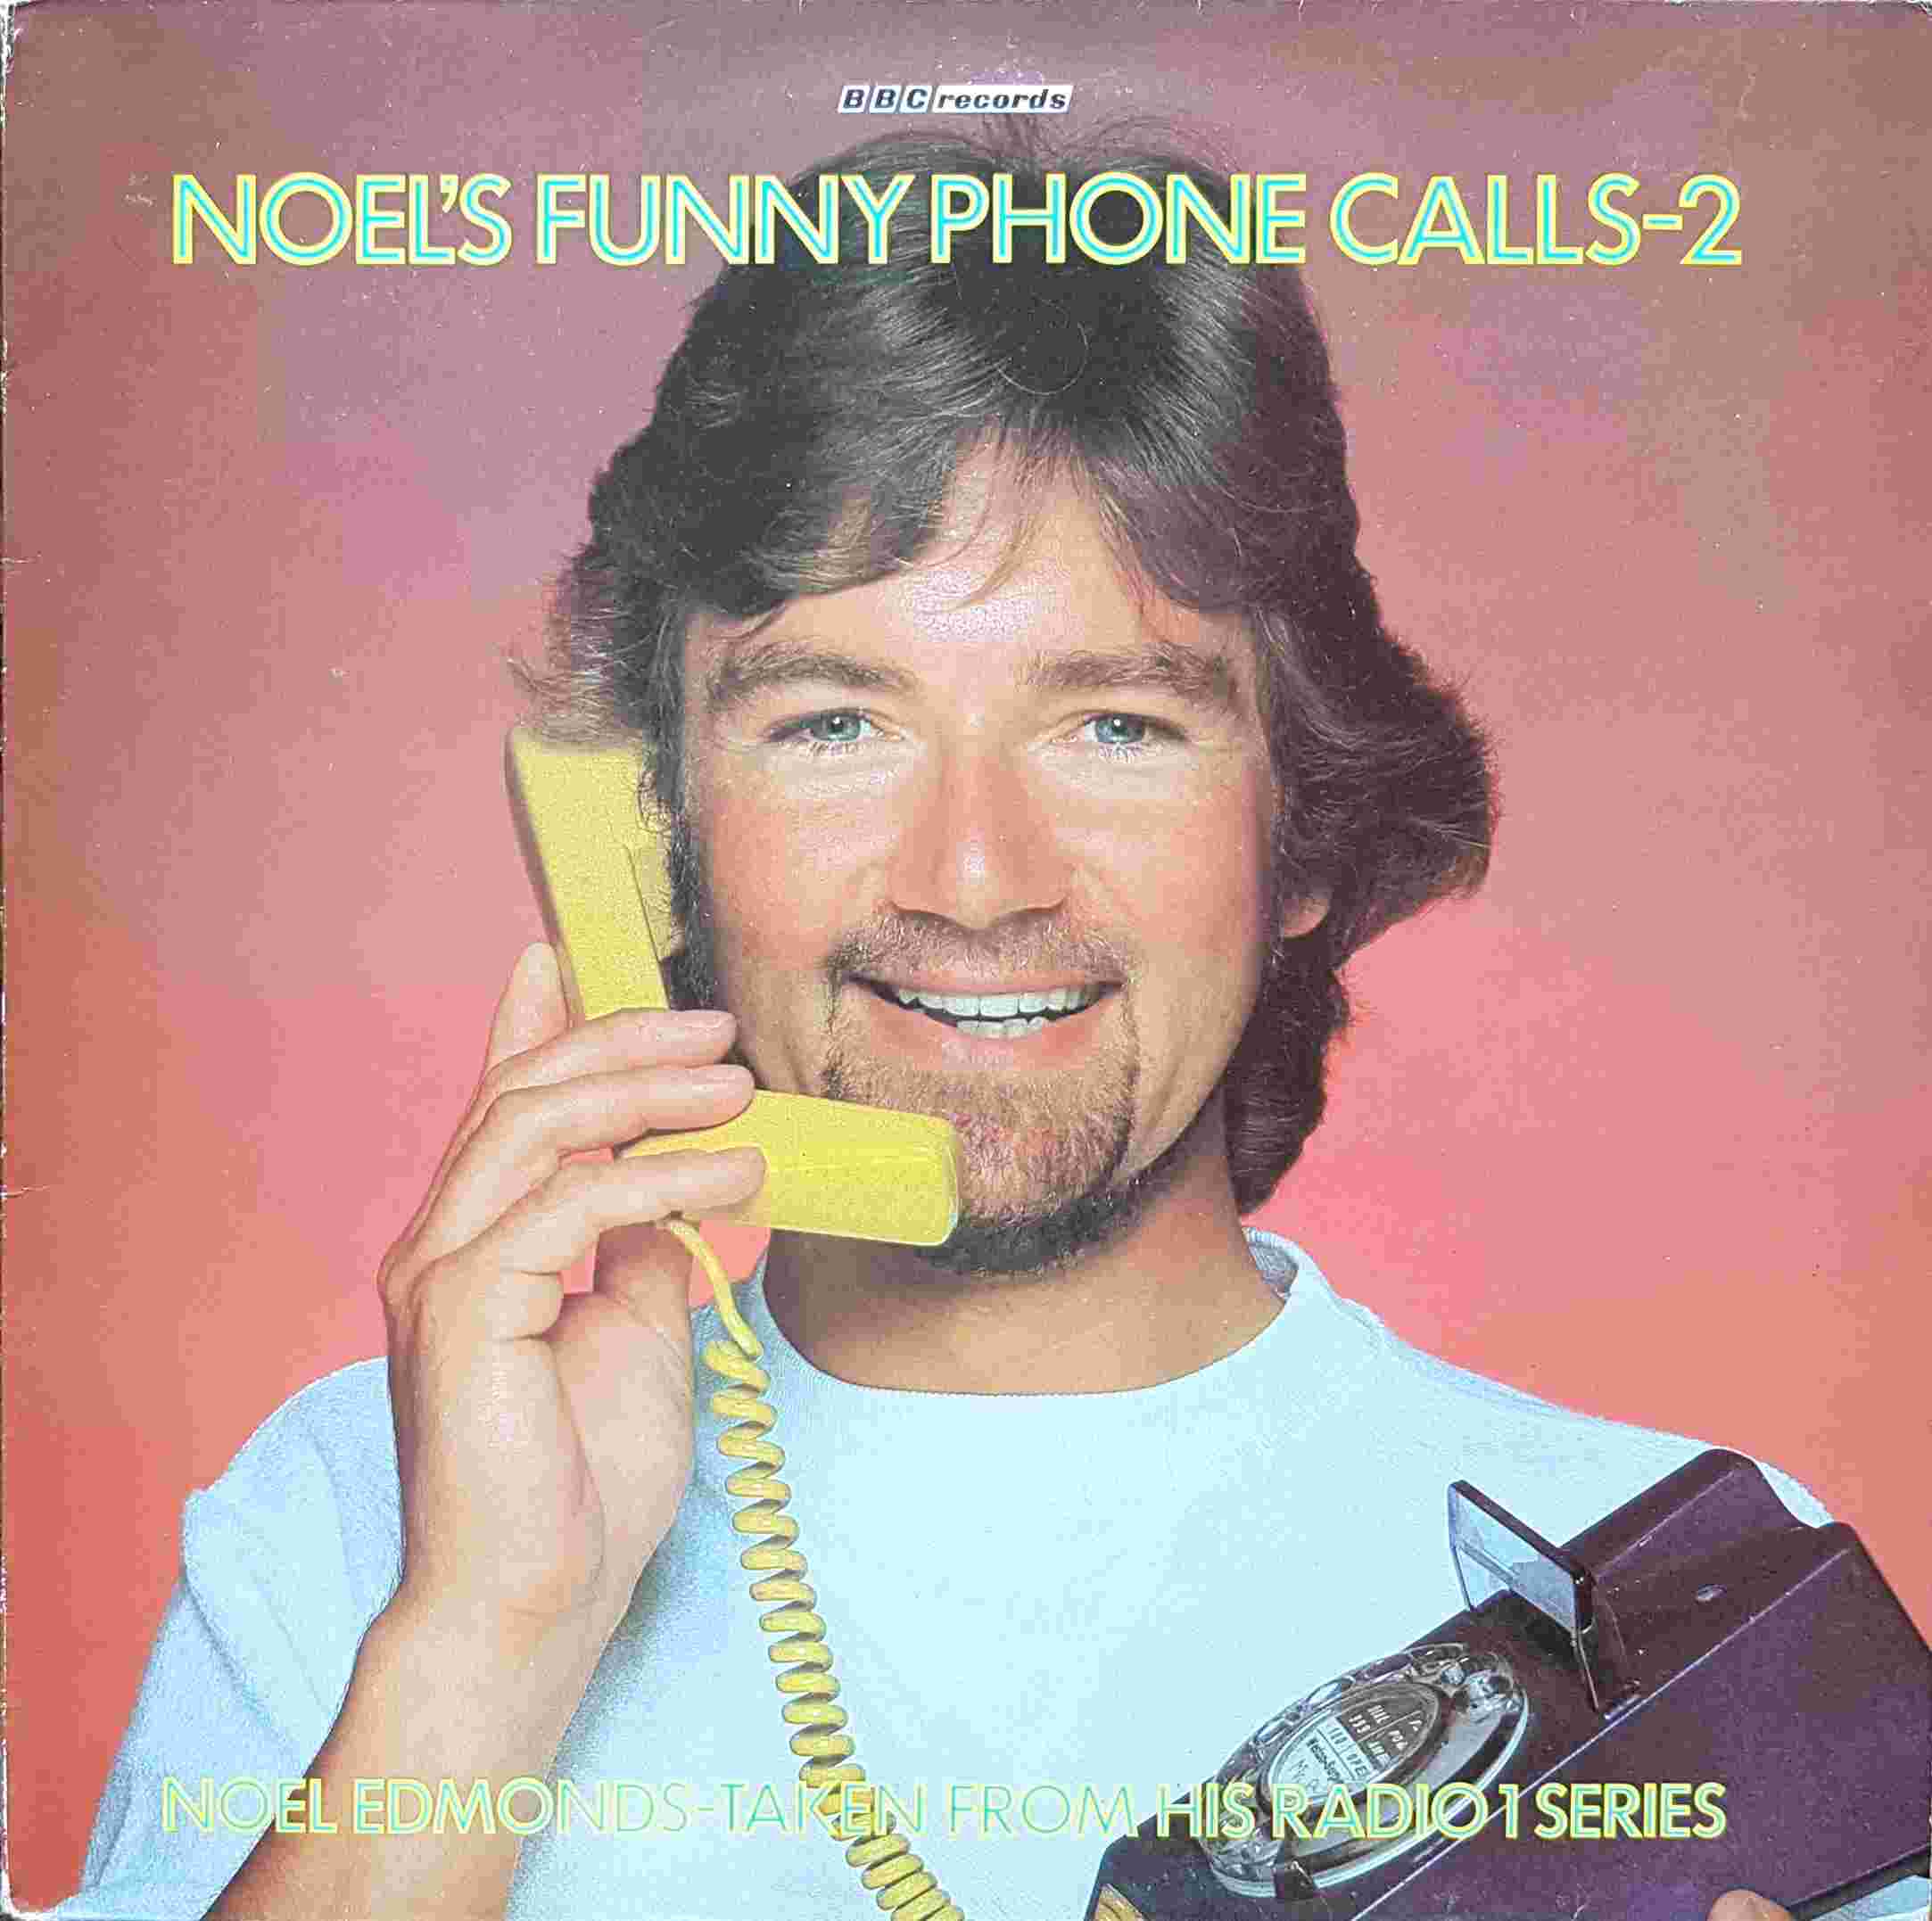 Picture of REC 456 Noel's funny phone calls - Volume 2 by artist Noel Edmunds from the BBC albums - Records and Tapes library